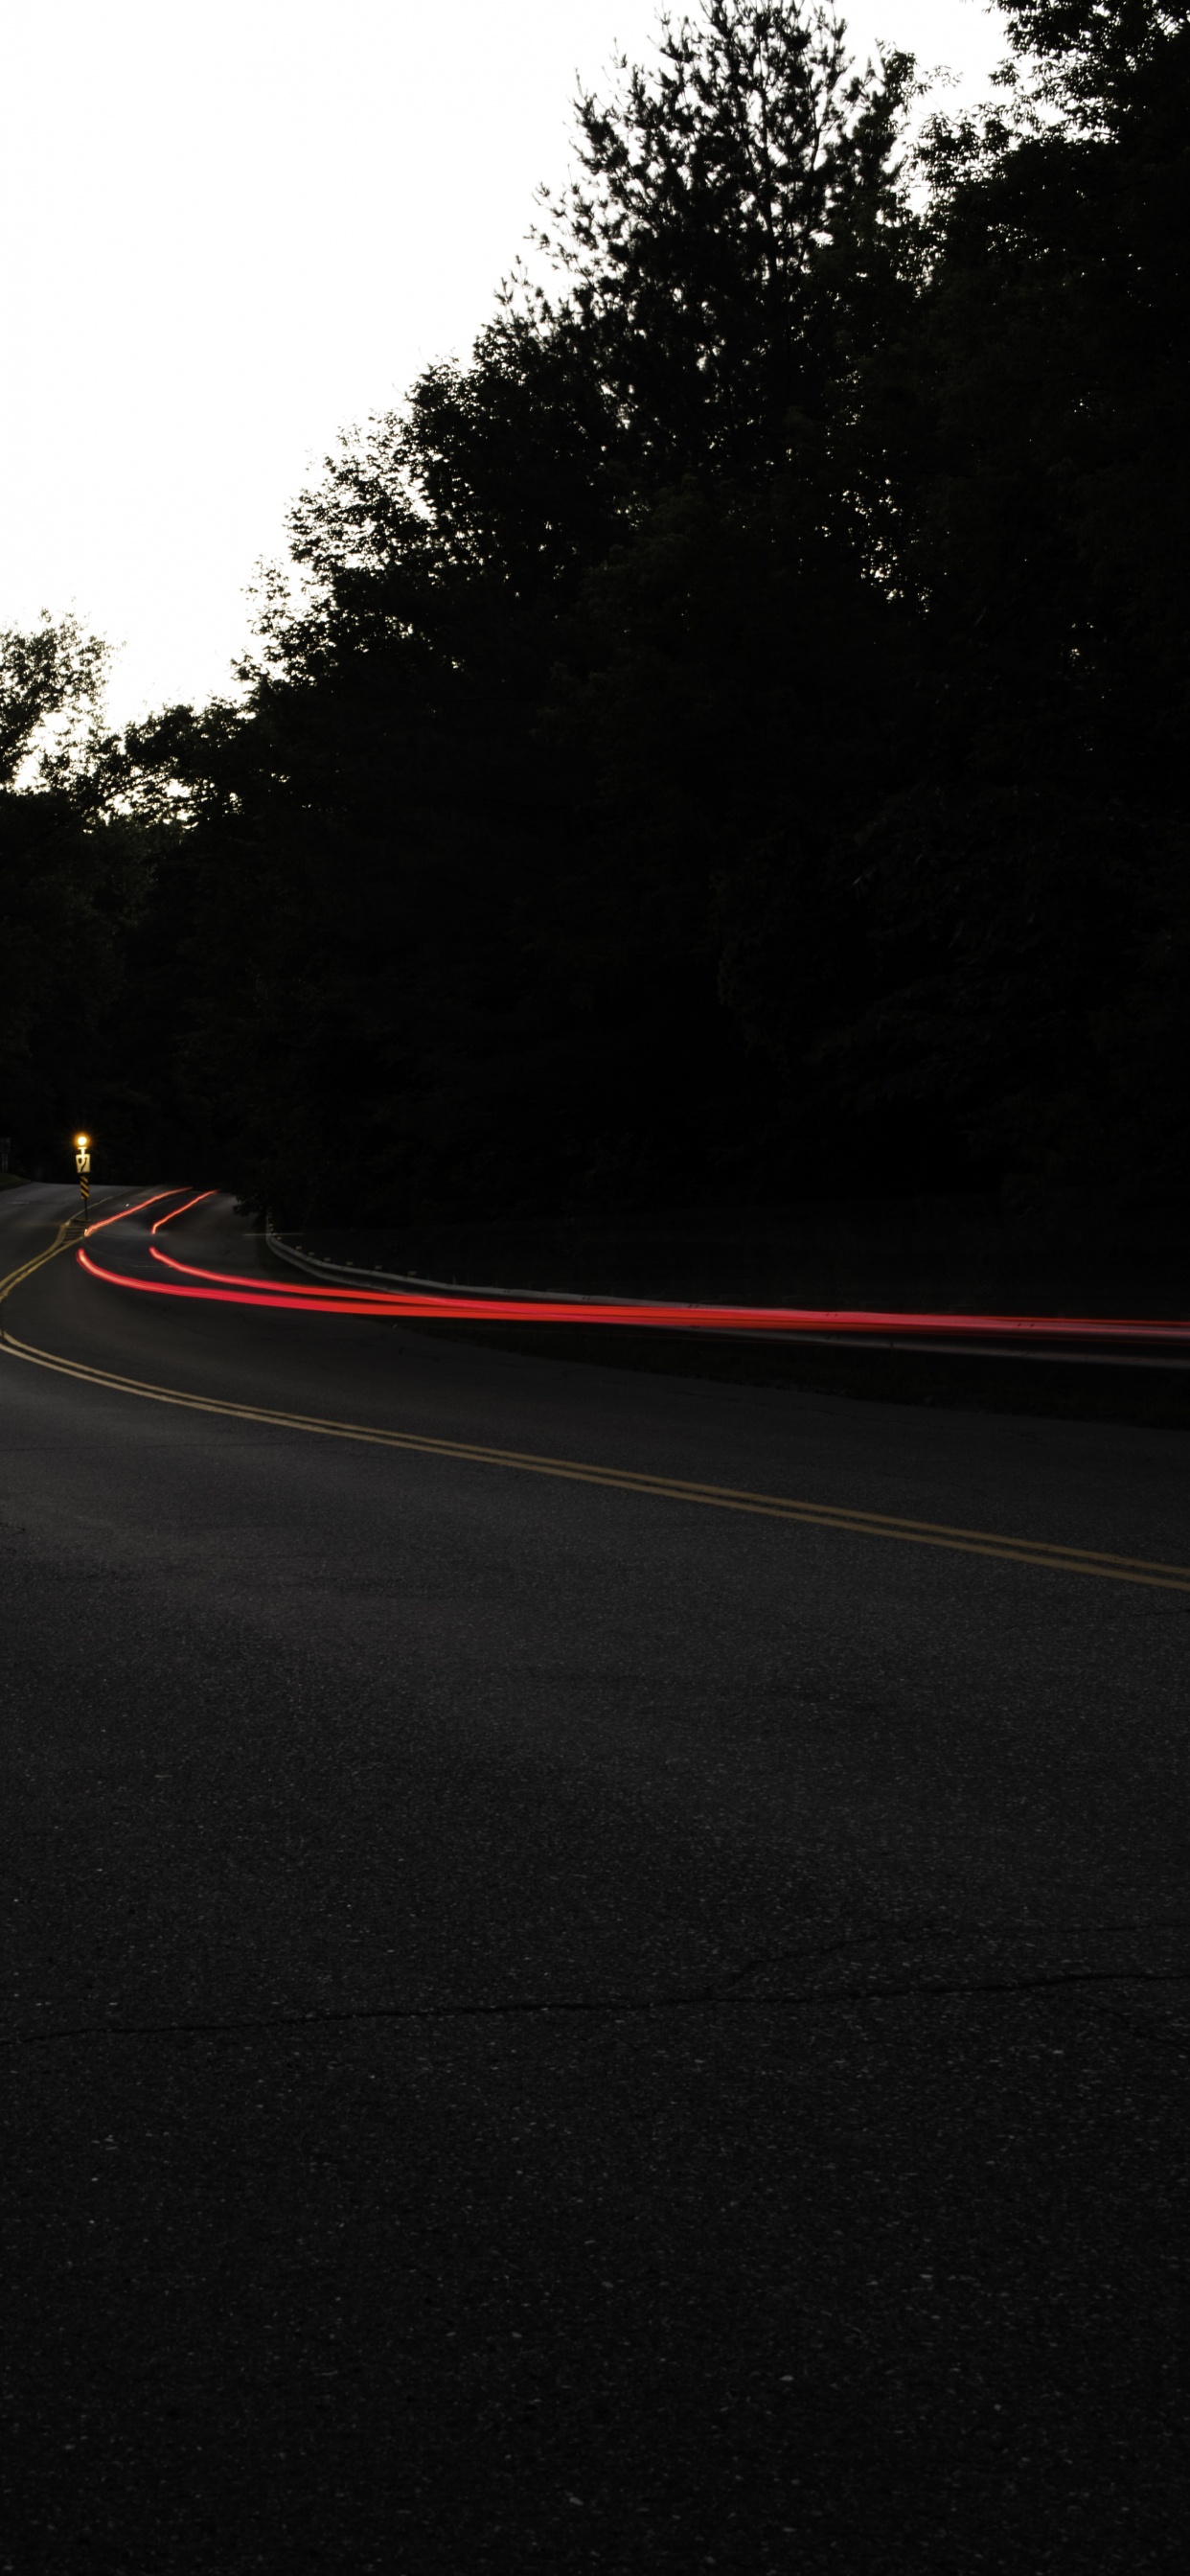 Time Lapse Photography of Road During Night Time. Wallpaper in 1242x2688 Resolution